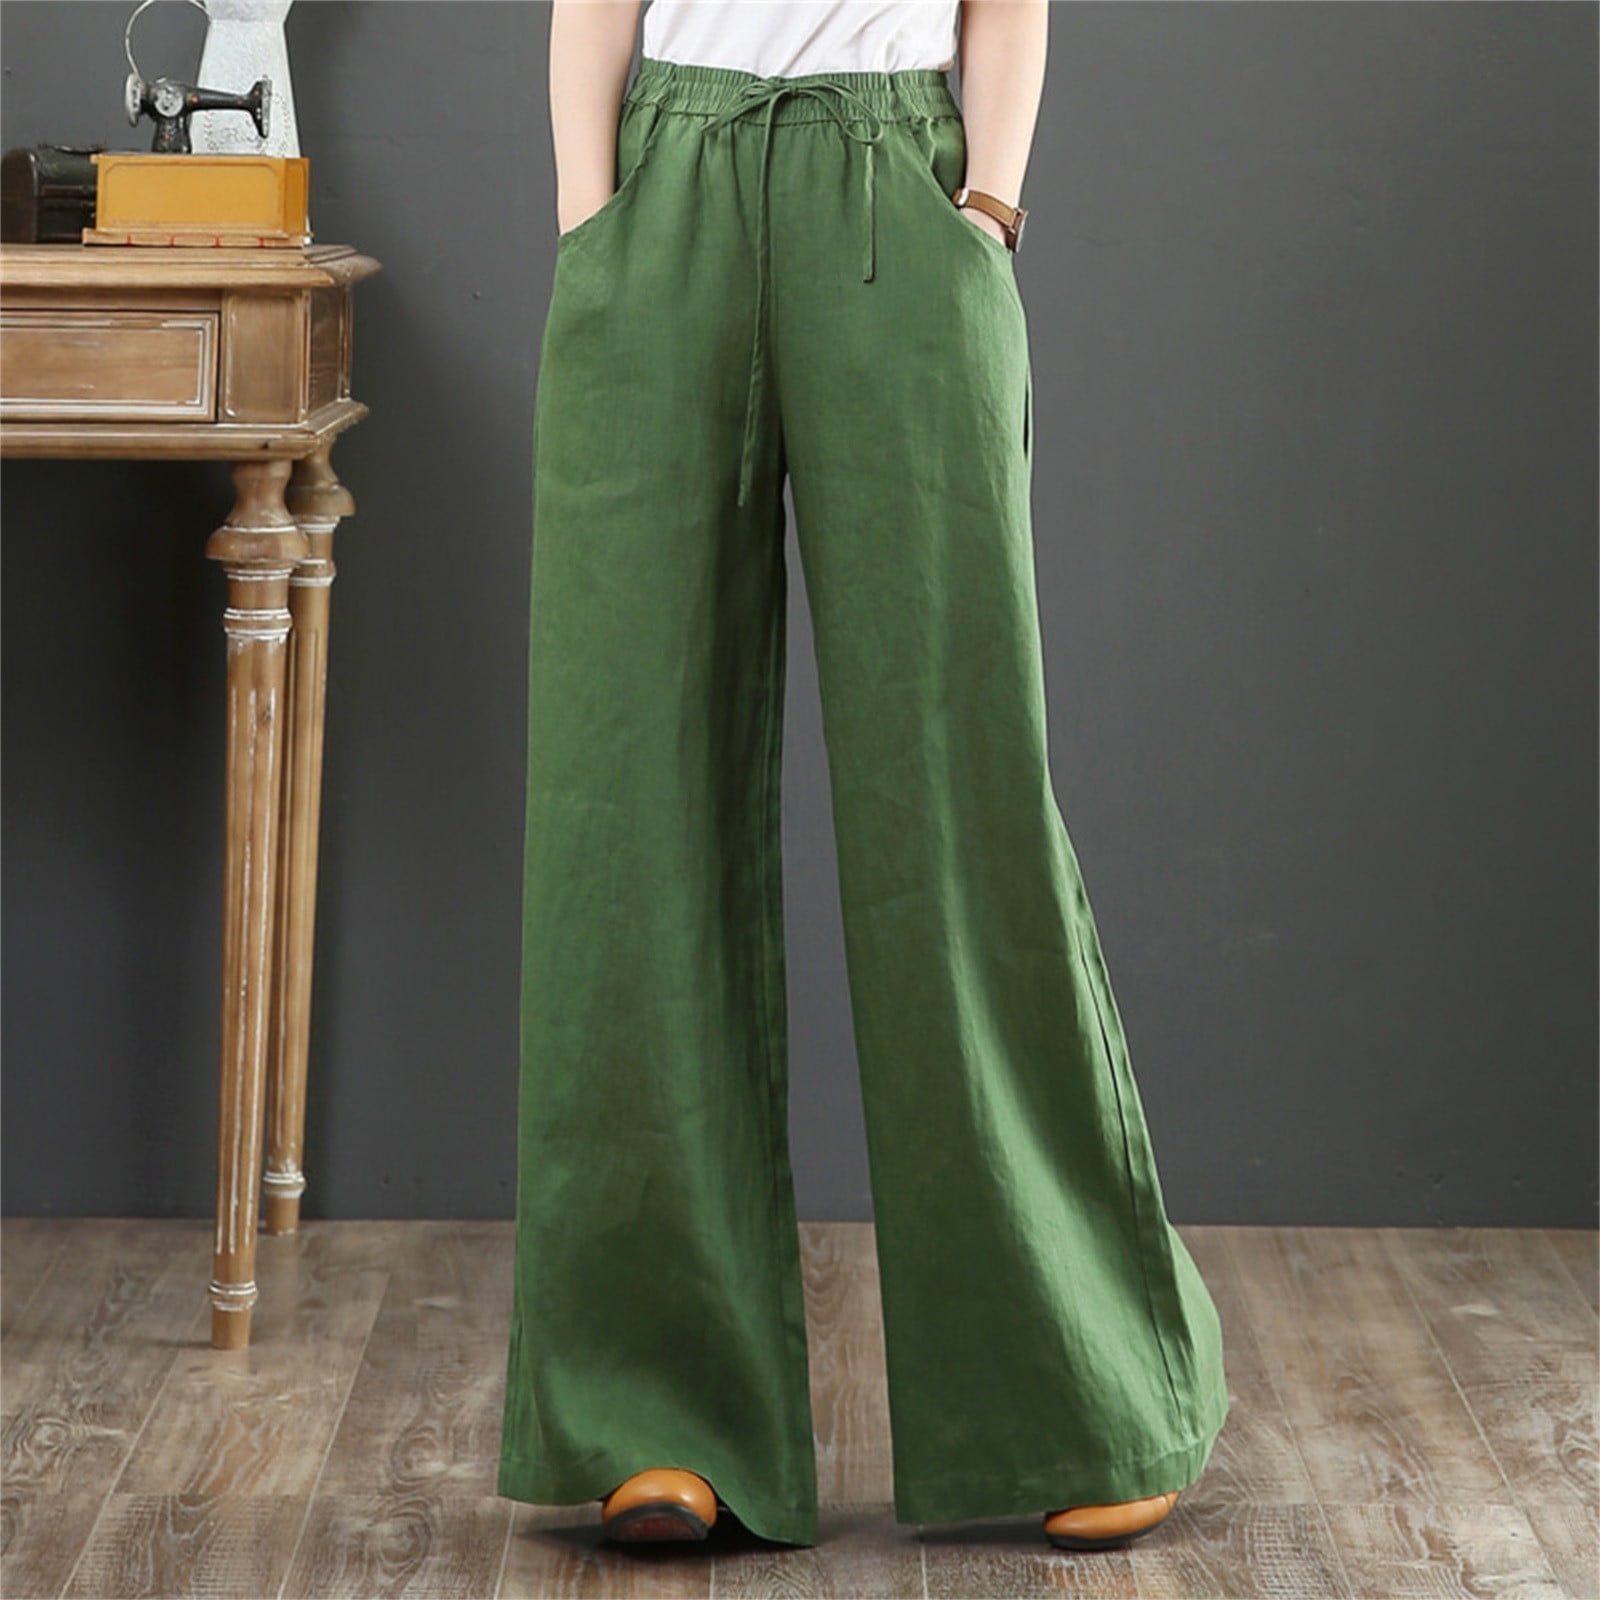 Cathalem Flare Yoga Pants for Women Pockets Wide High Pants Bell